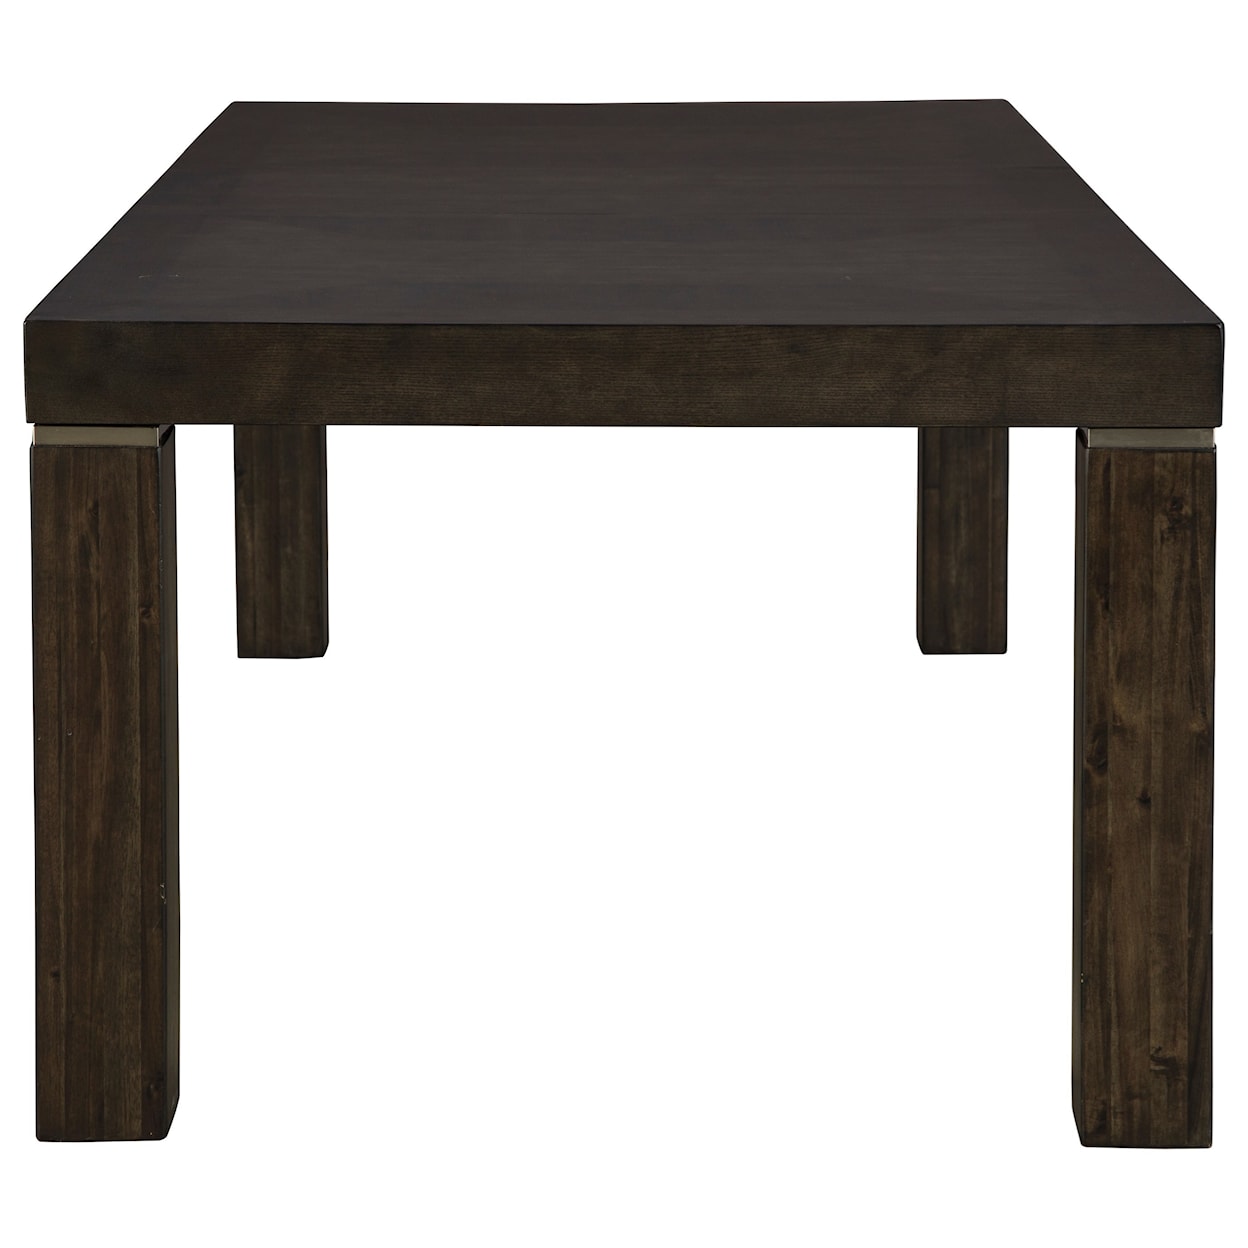 Signature Design Hyndell Rectangular Dining Room Extension Table